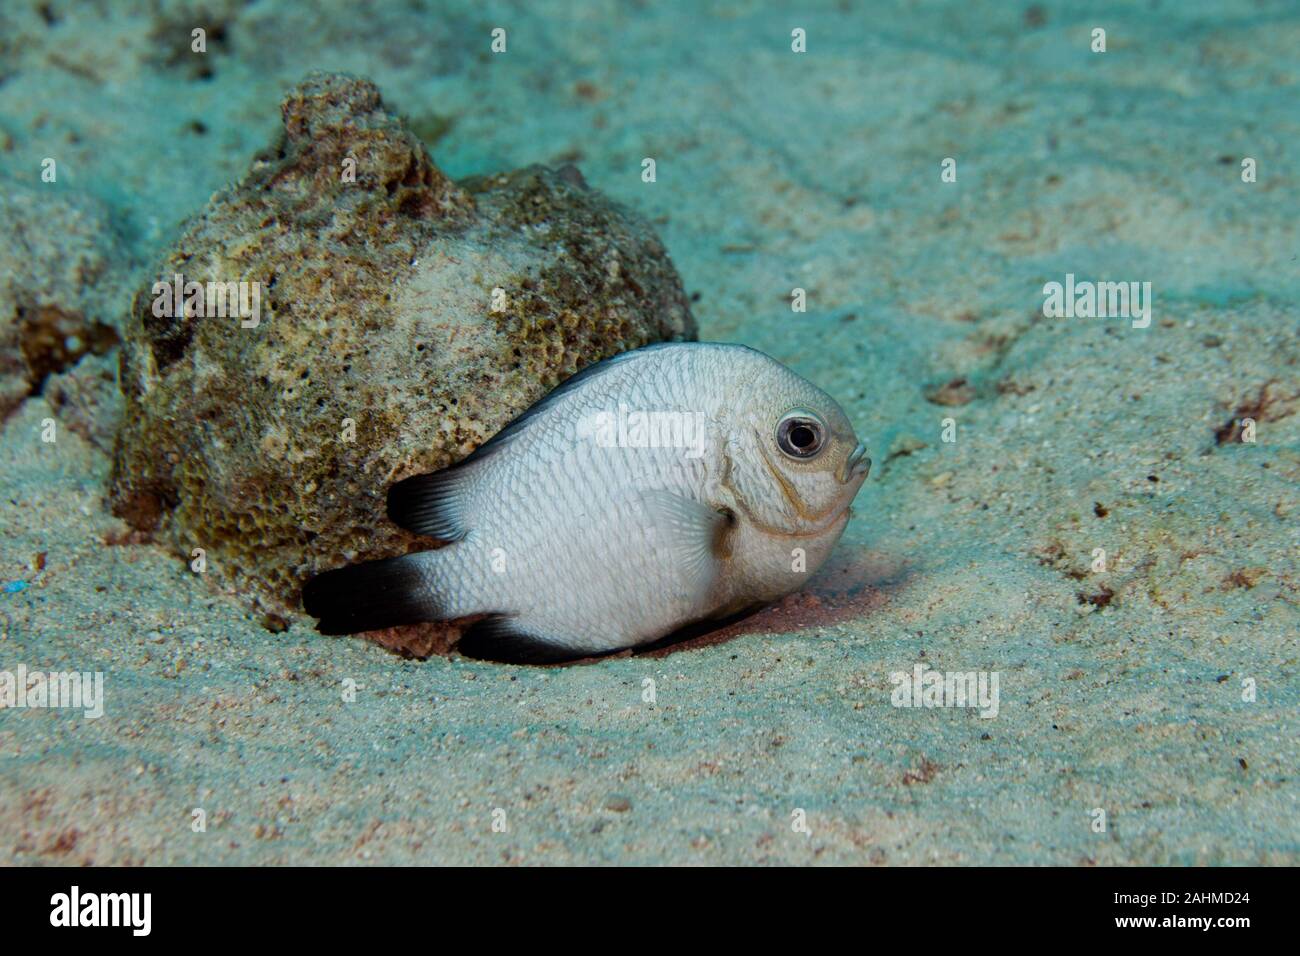 The threespot dascyllus (Dascyllus trimaculatus), also known as the domino damsel or simply domino, is a species of damselfish from the family Pomacen Stock Photo